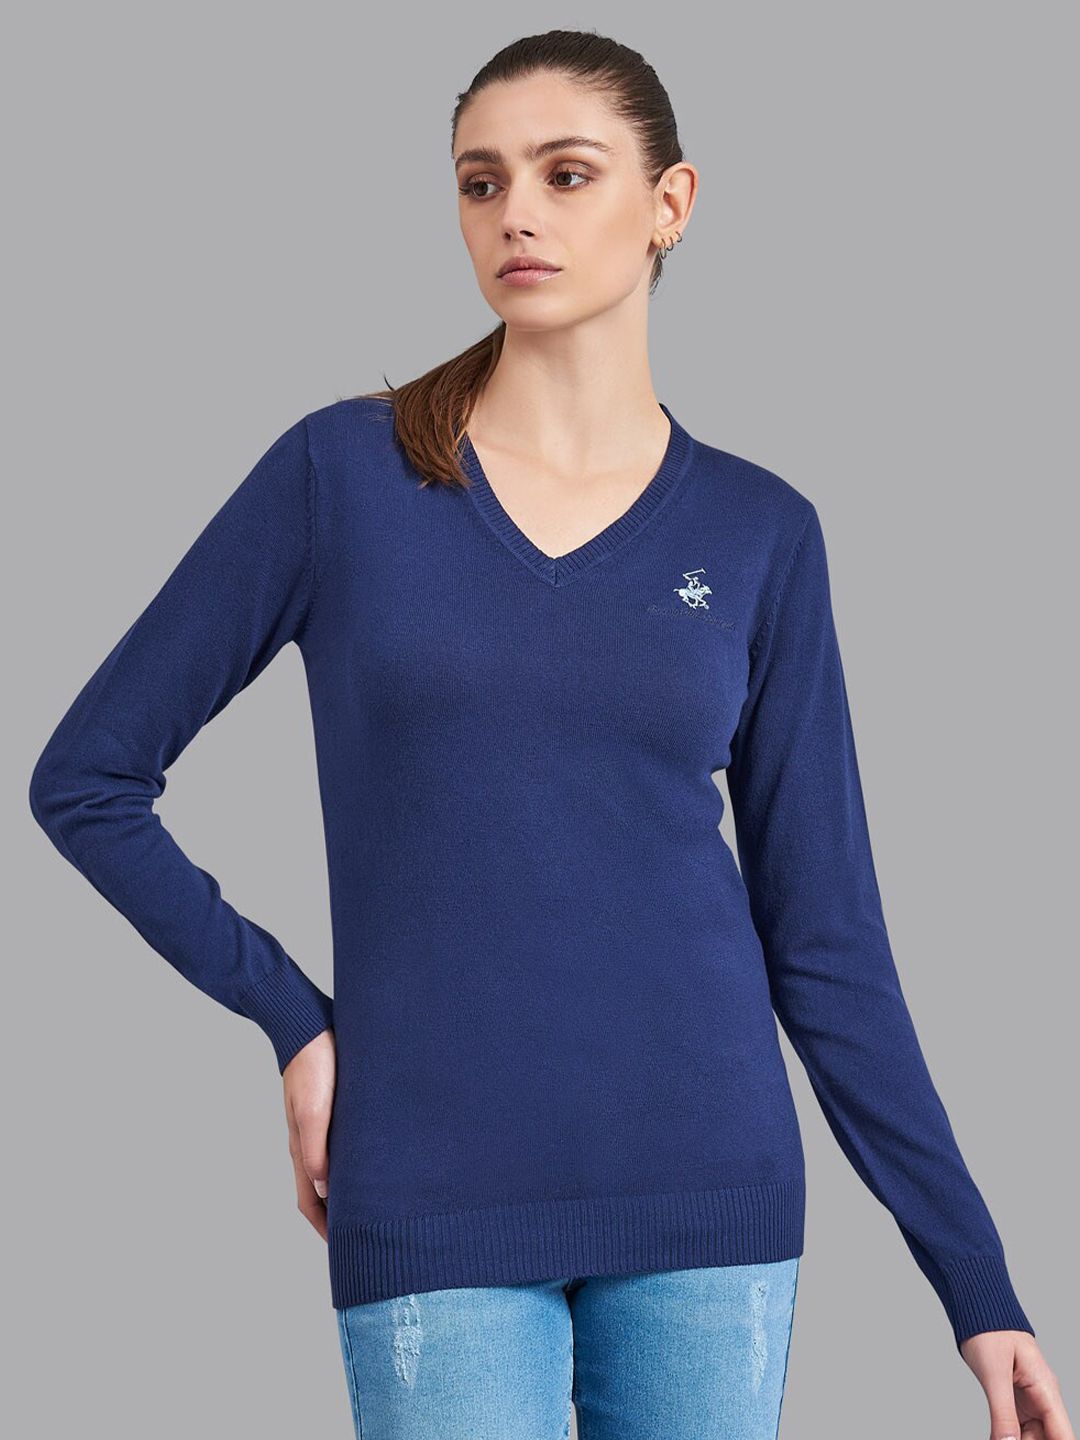 Beverly Hills Polo Club Women Navy Blue Pullover Price in India